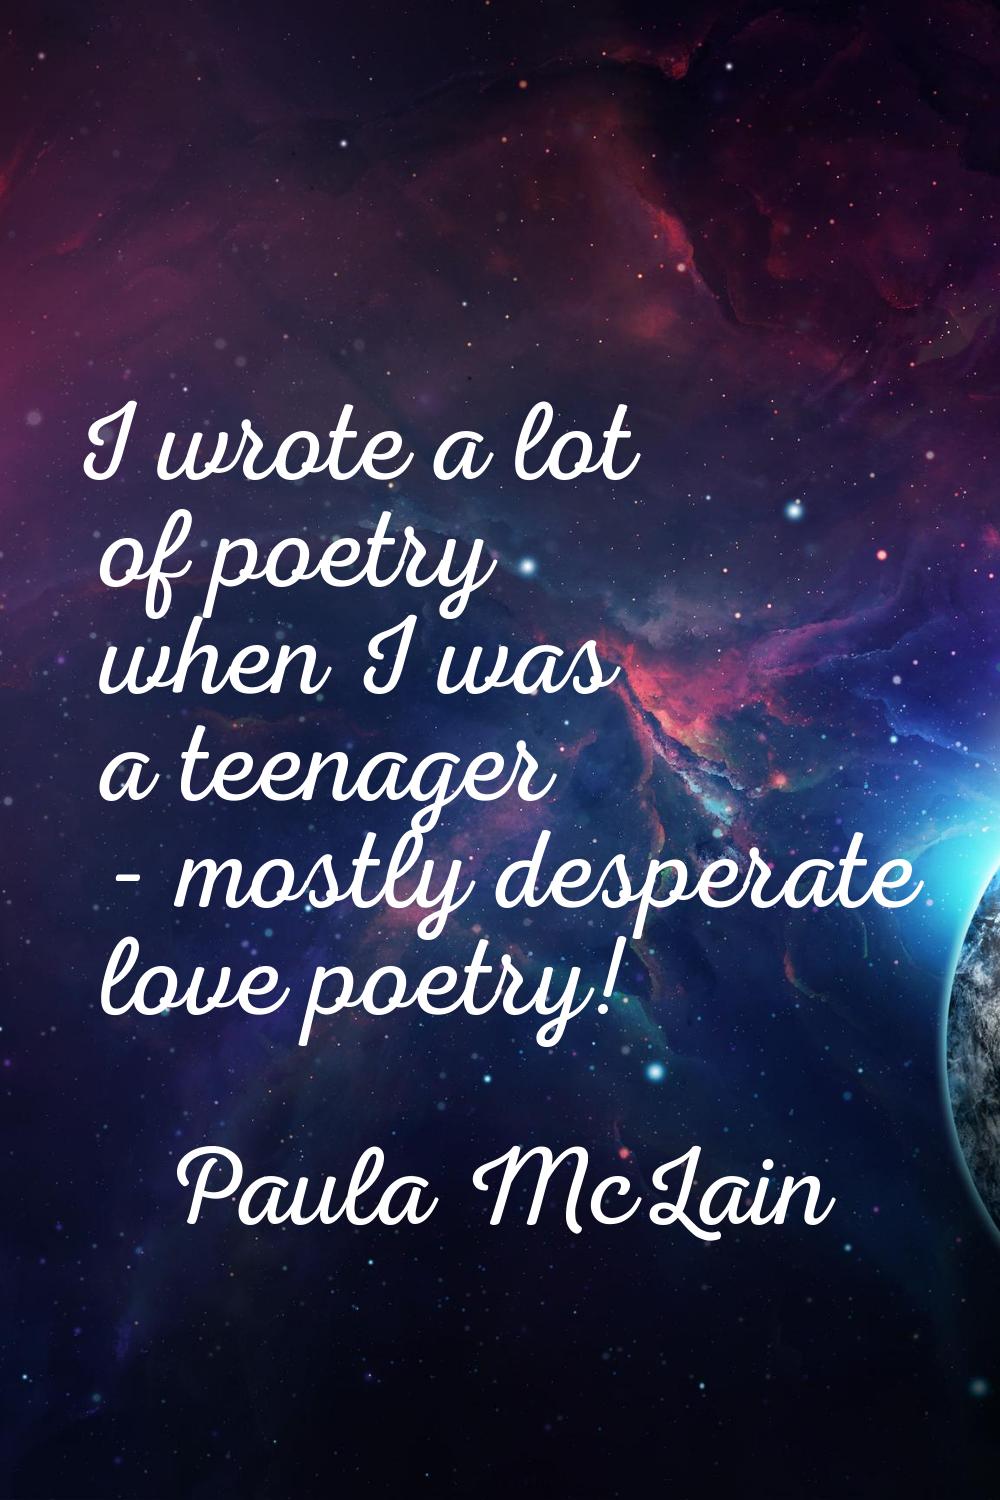 I wrote a lot of poetry when I was a teenager - mostly desperate love poetry!